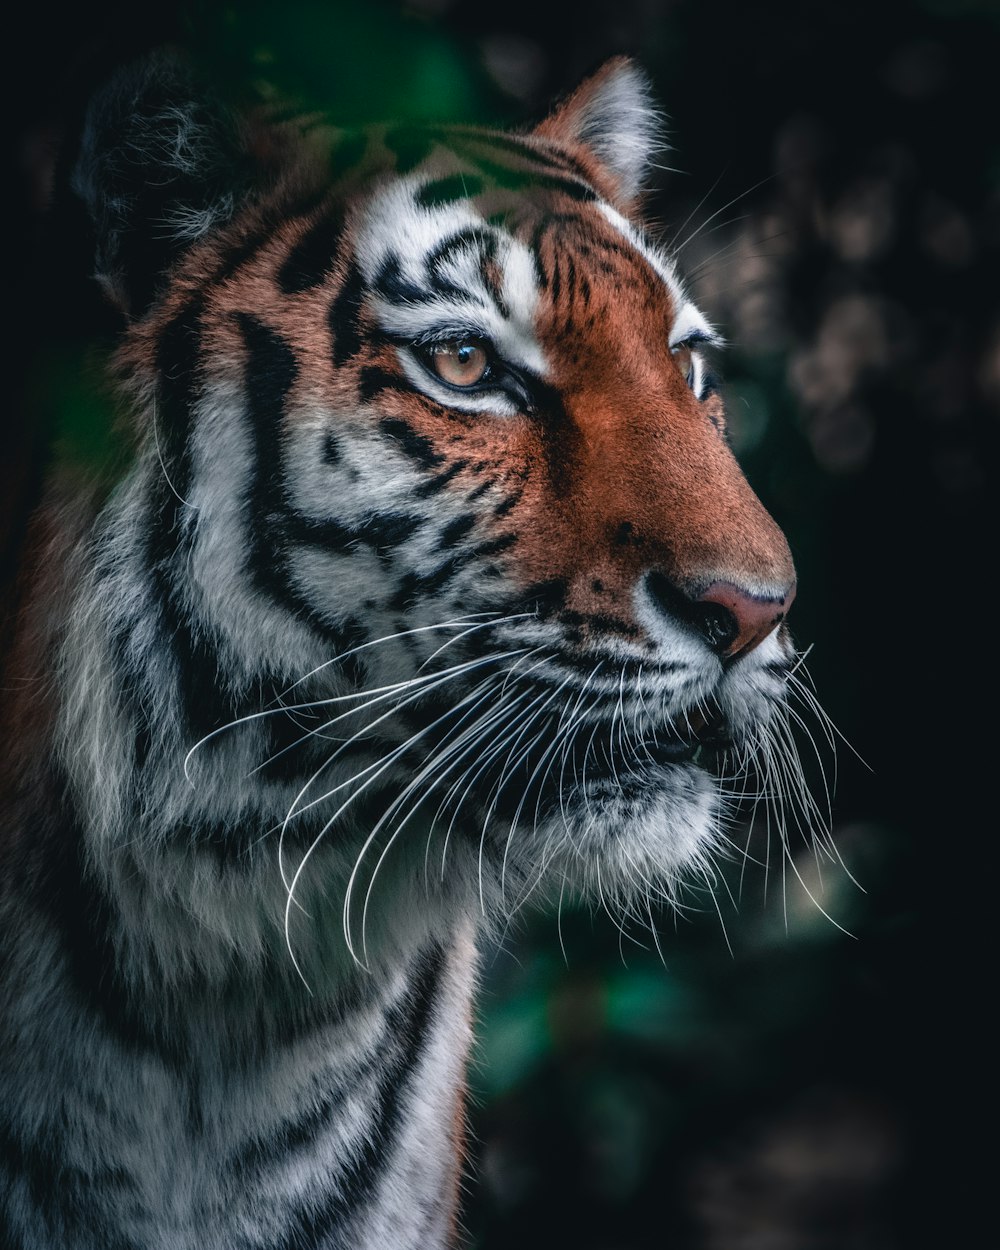 brown and black tiger in close up photography